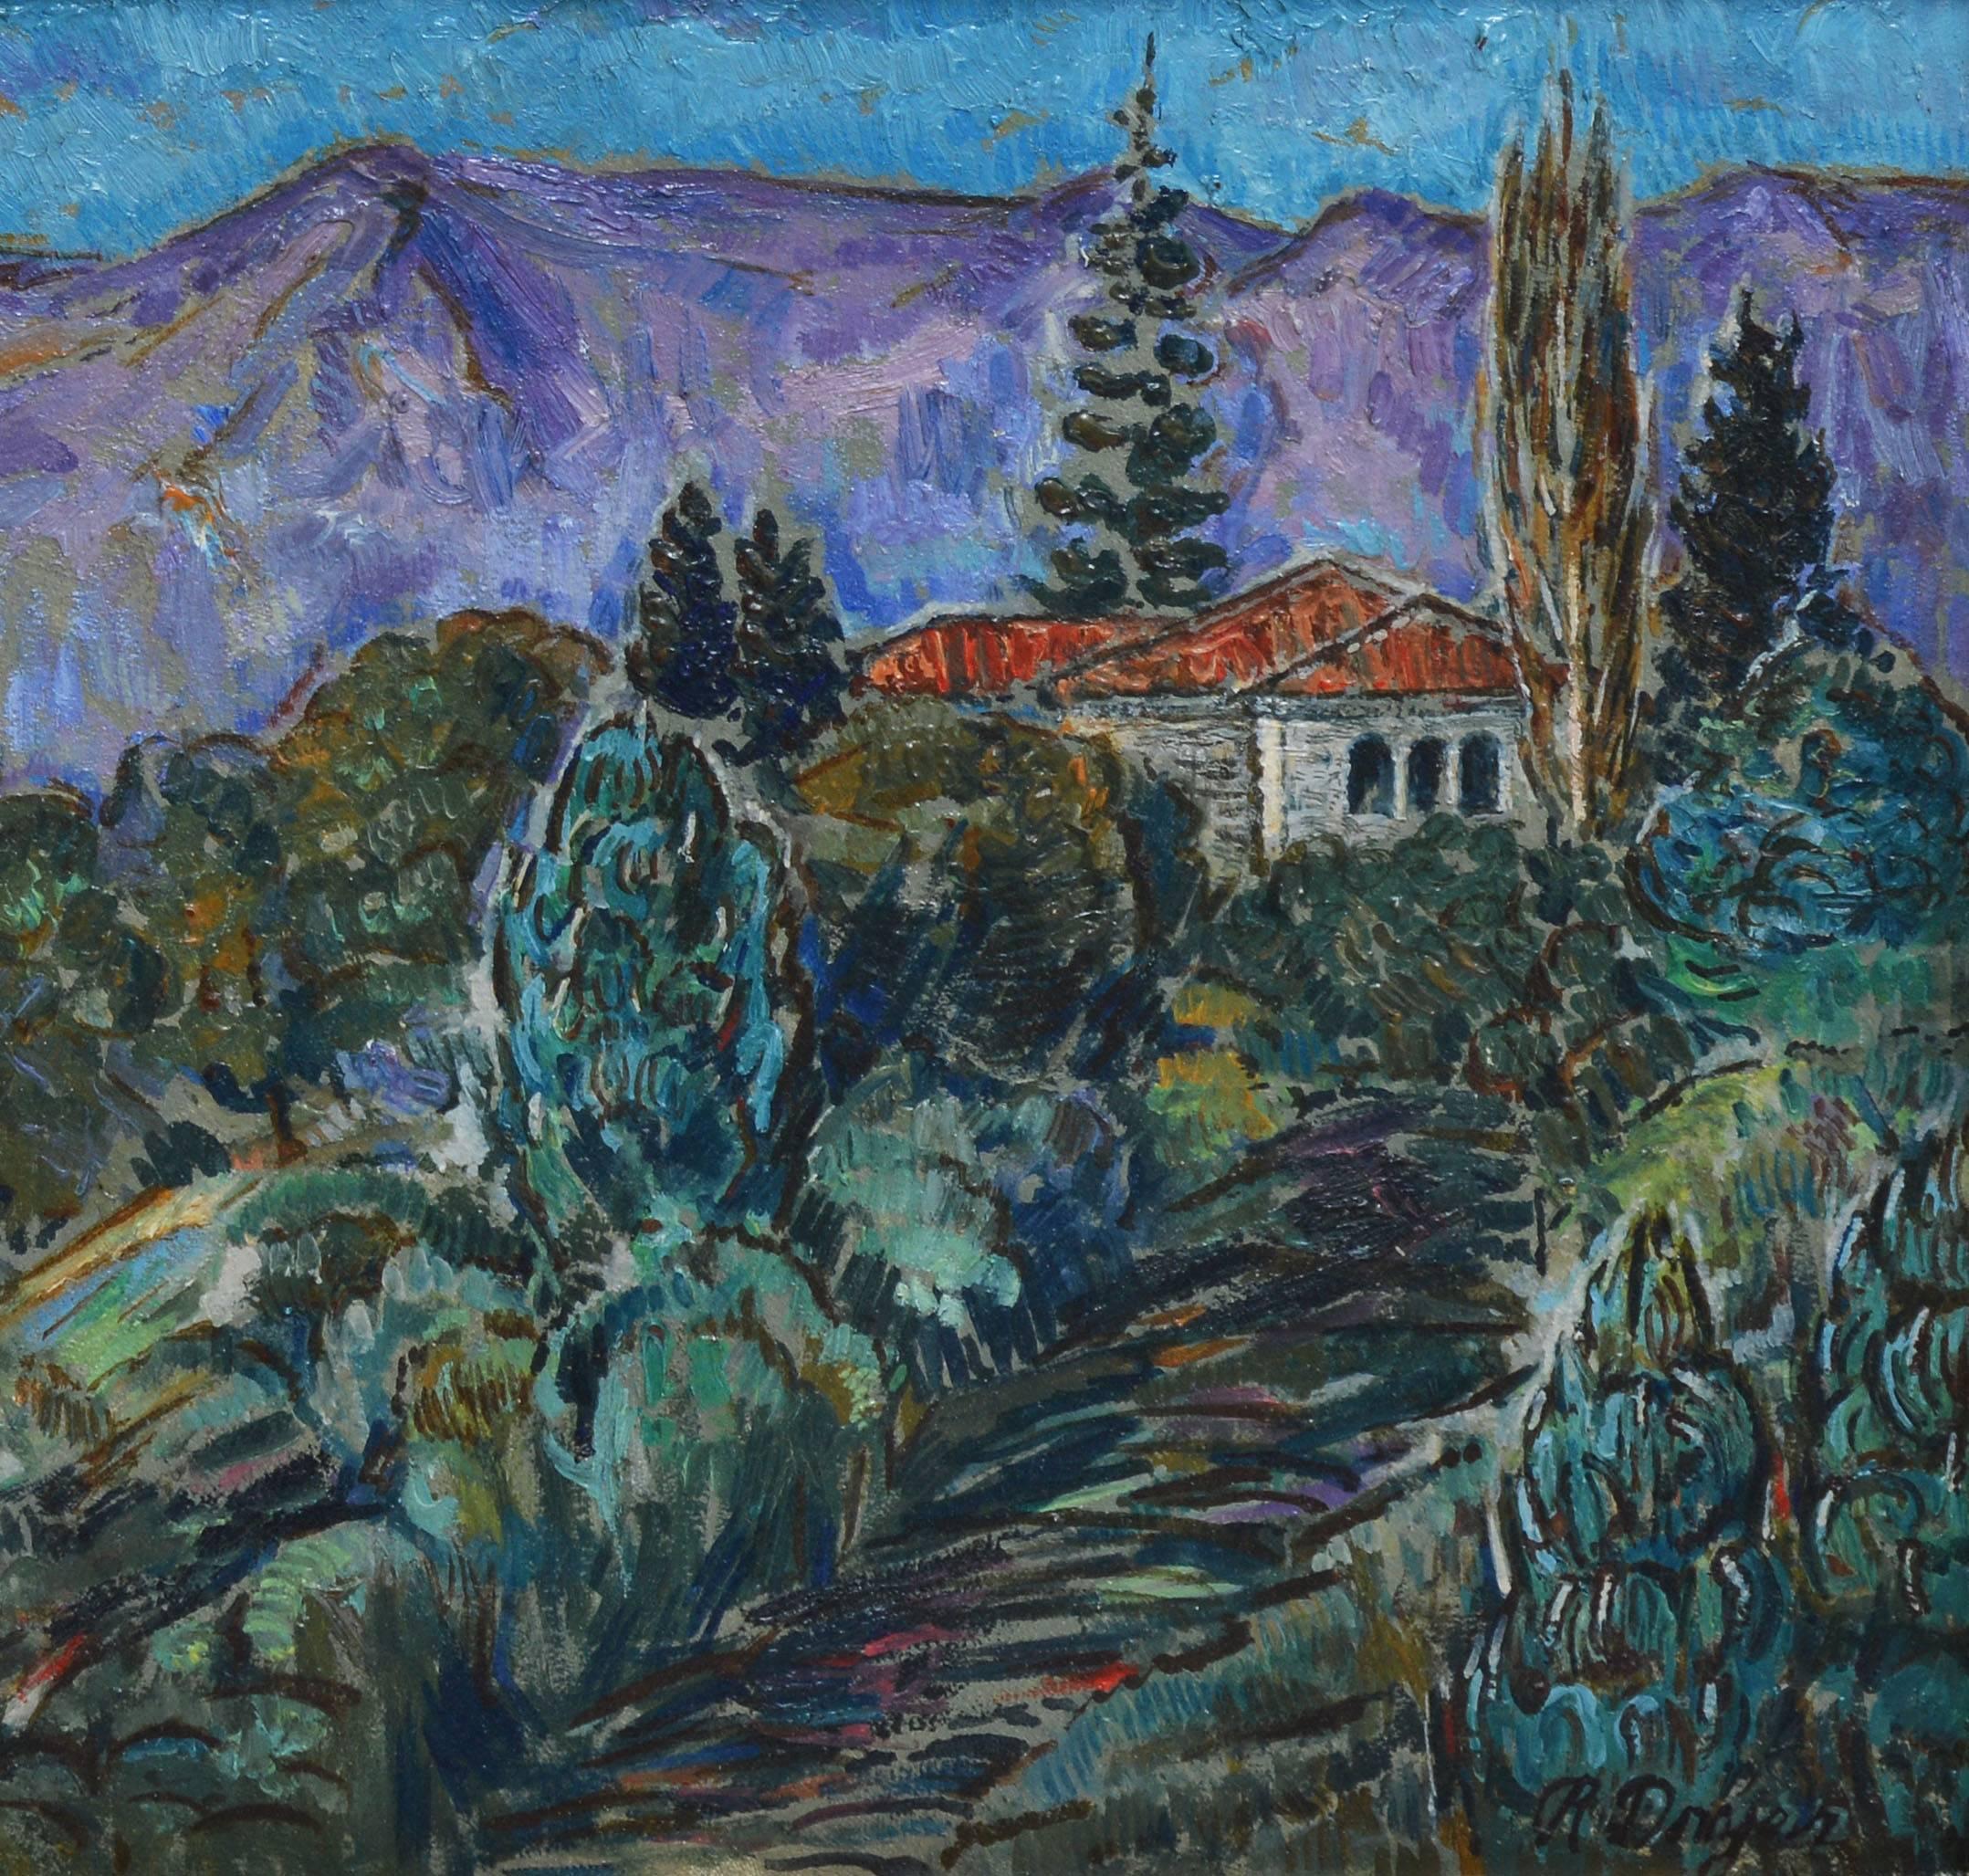 Fauvist mountain landscape by Rufus Dryer (1880-1937).  Oil on board, circa 1910.  Signed lower right, 